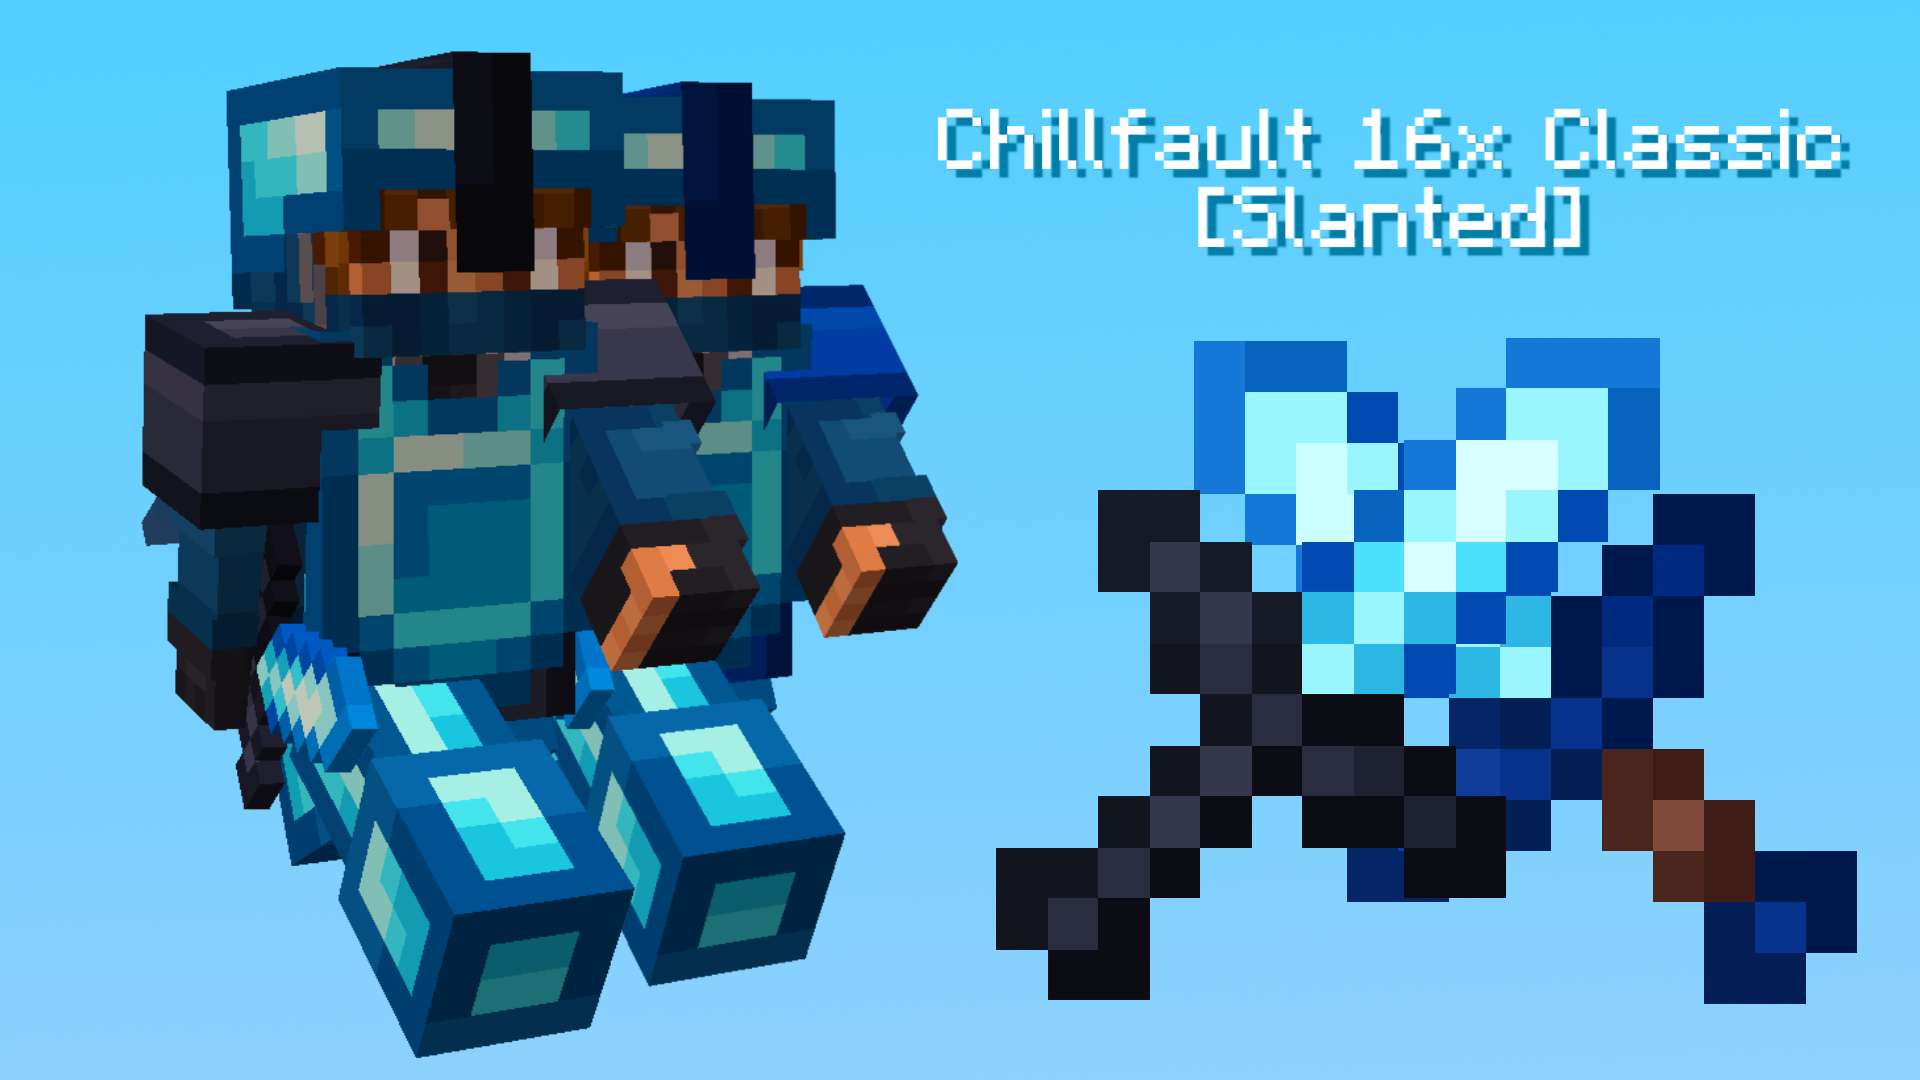 Chillfault 16x Classic [Slanted] 16x by Jes13 on PvPRP